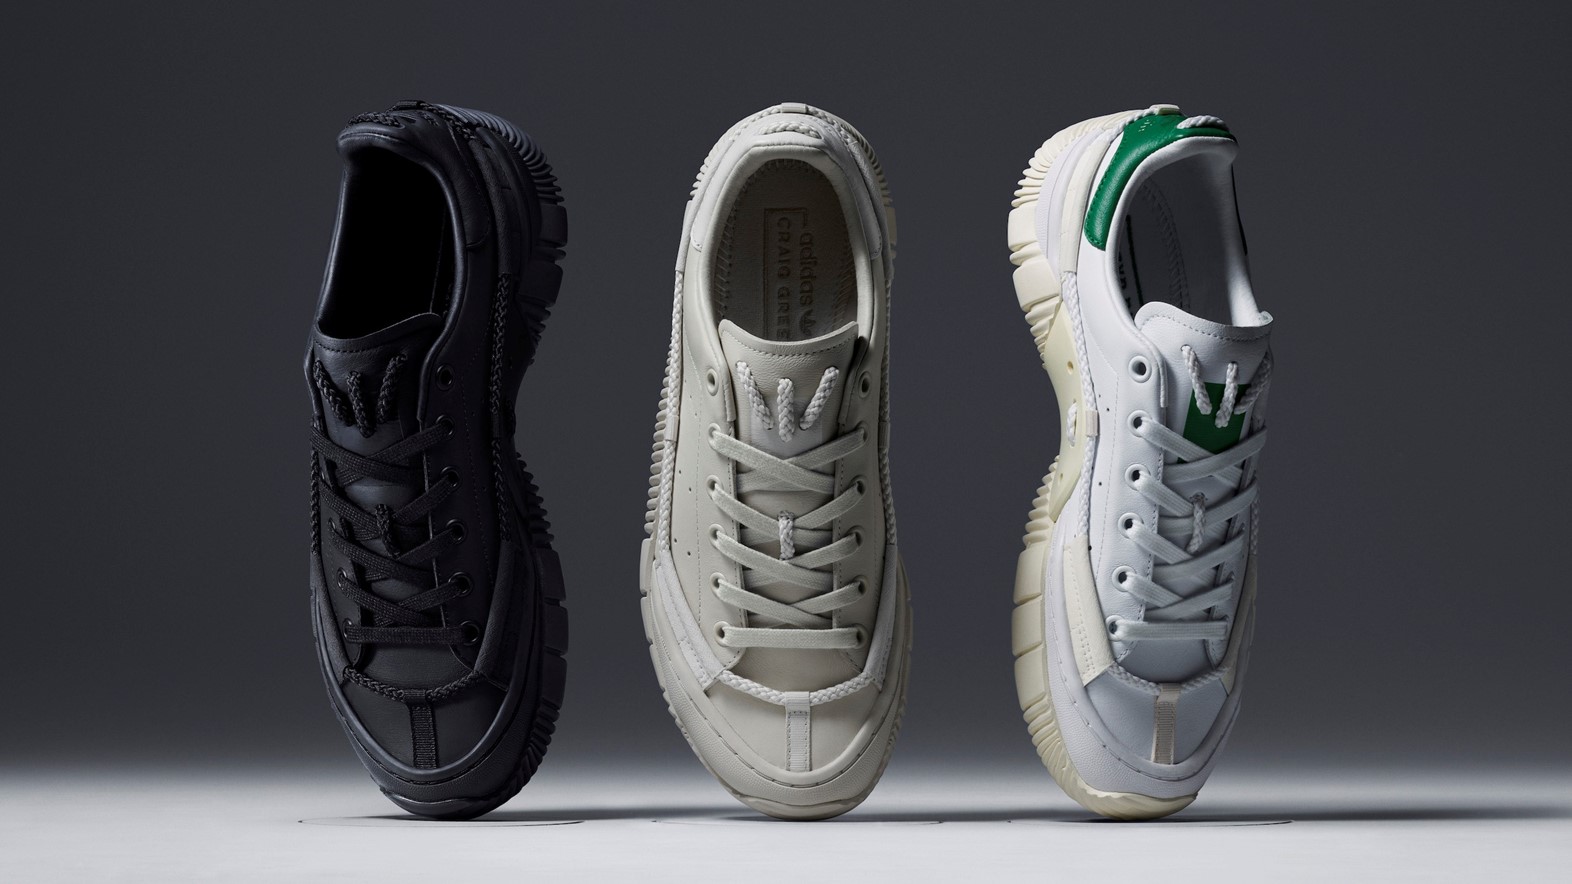 The Past, Present and Future of the adidas Stan Smith